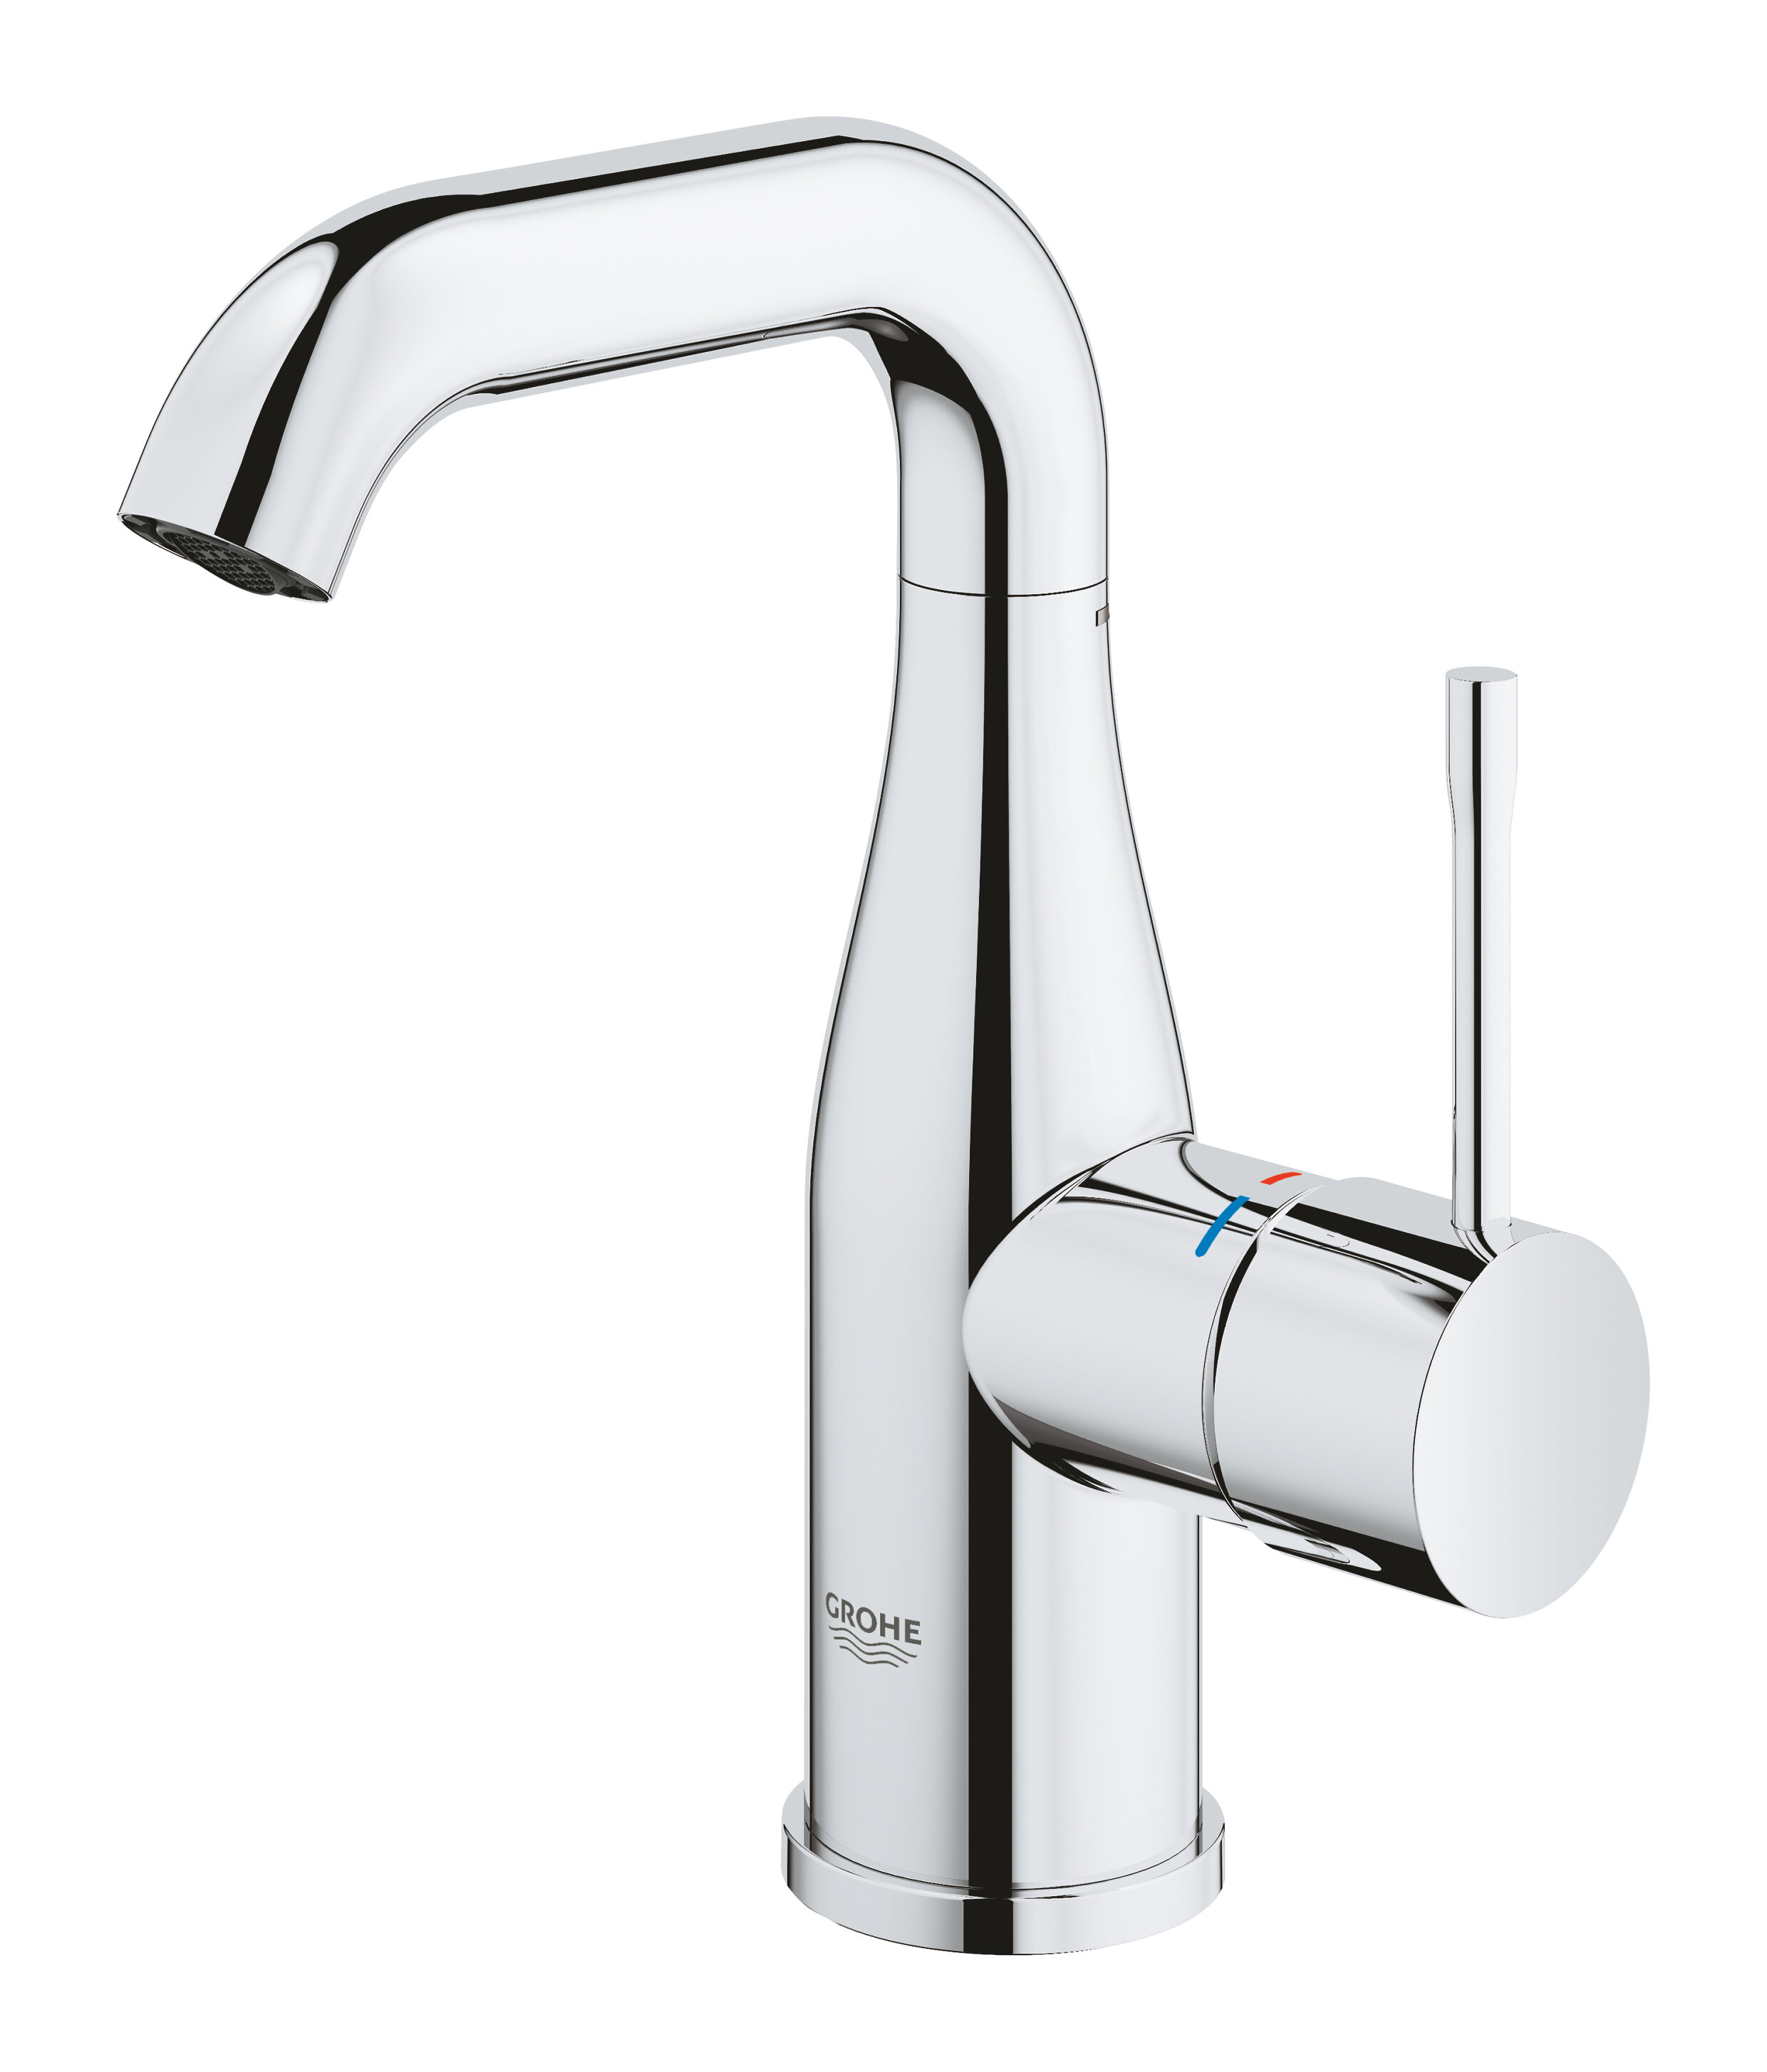 Grohe Essence Single Hole Bathroom Faucet With Pop Up Reviews